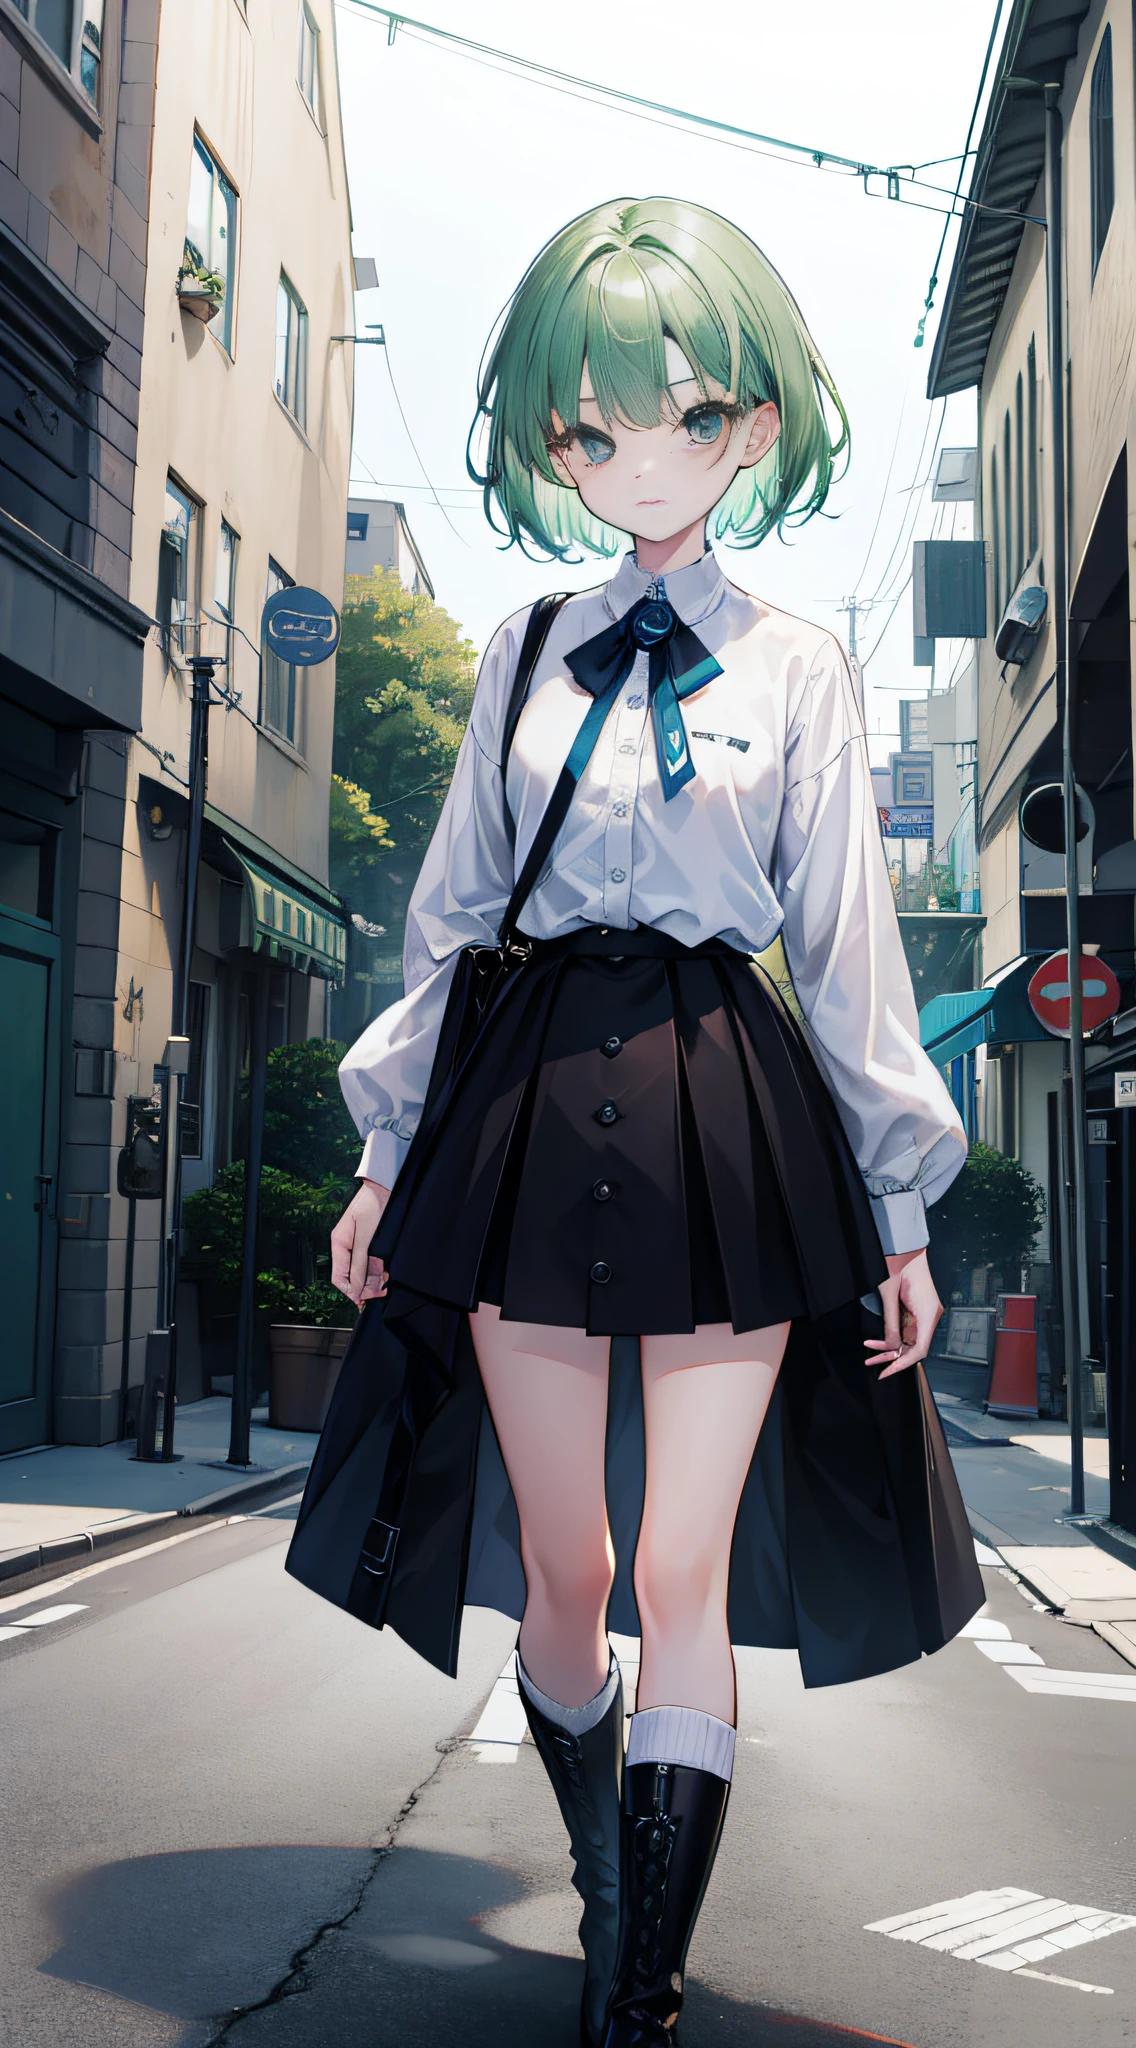 A girl with short hair, Black eyes, and messy light green hair. Her expression was gentle，A surprised expression appeared on his face. She is ，Young appearance. She wore a white shirt and blue and white boots. The artwork is of the best quality, 4K or 8K resolution, Considered a masterpiece. The girl's facial features are rich in detail, And the scene is panorama, Capture the essence of the moment.